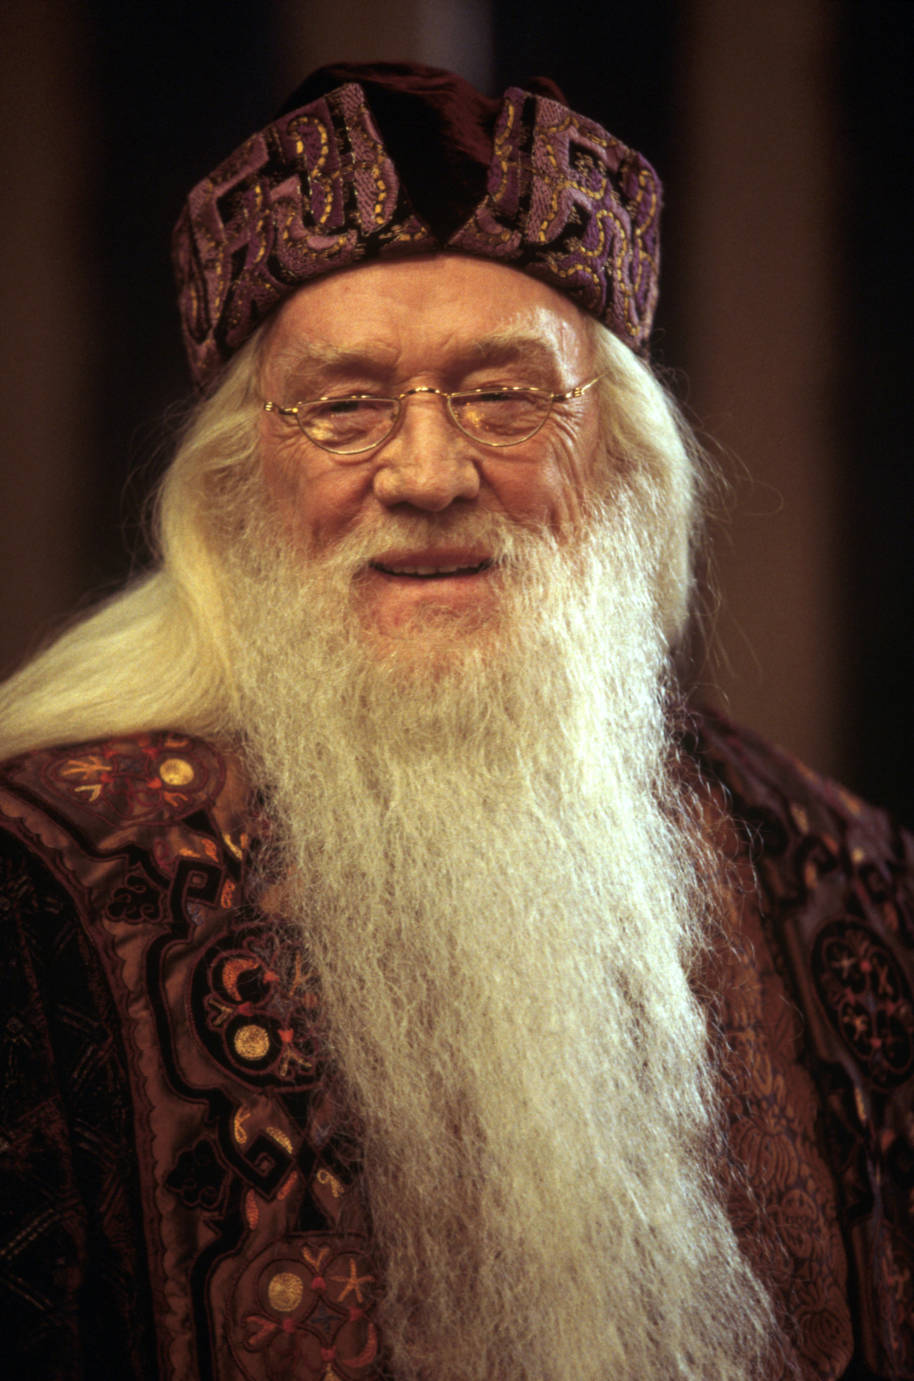 Dumbledore smiling from the Philosopher's Stone 